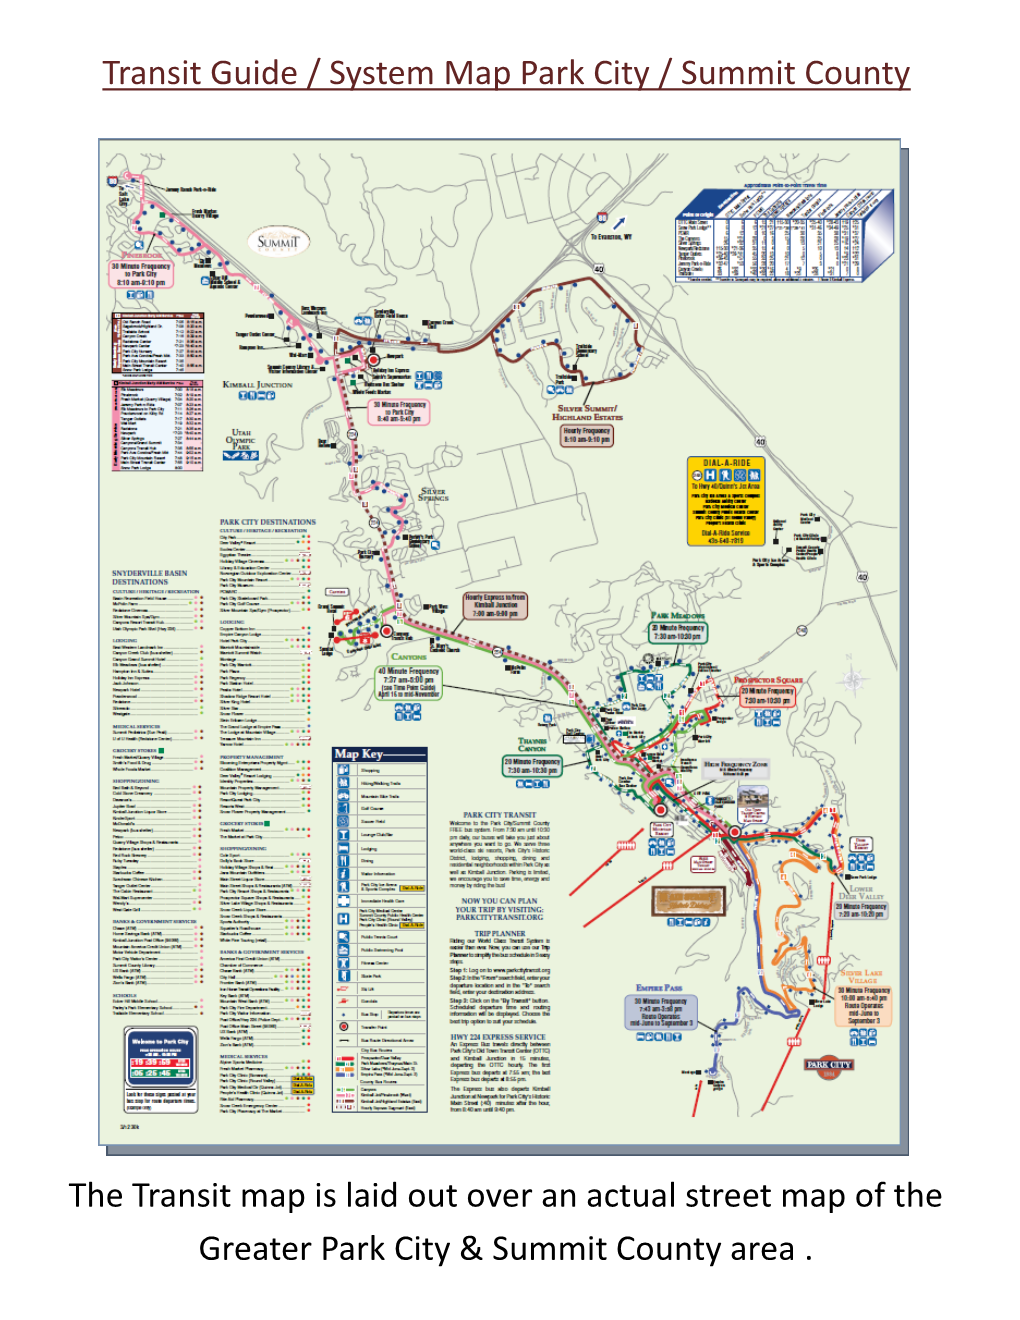 Transit Guide / System Map Park City / Summit County the Transit Map Is